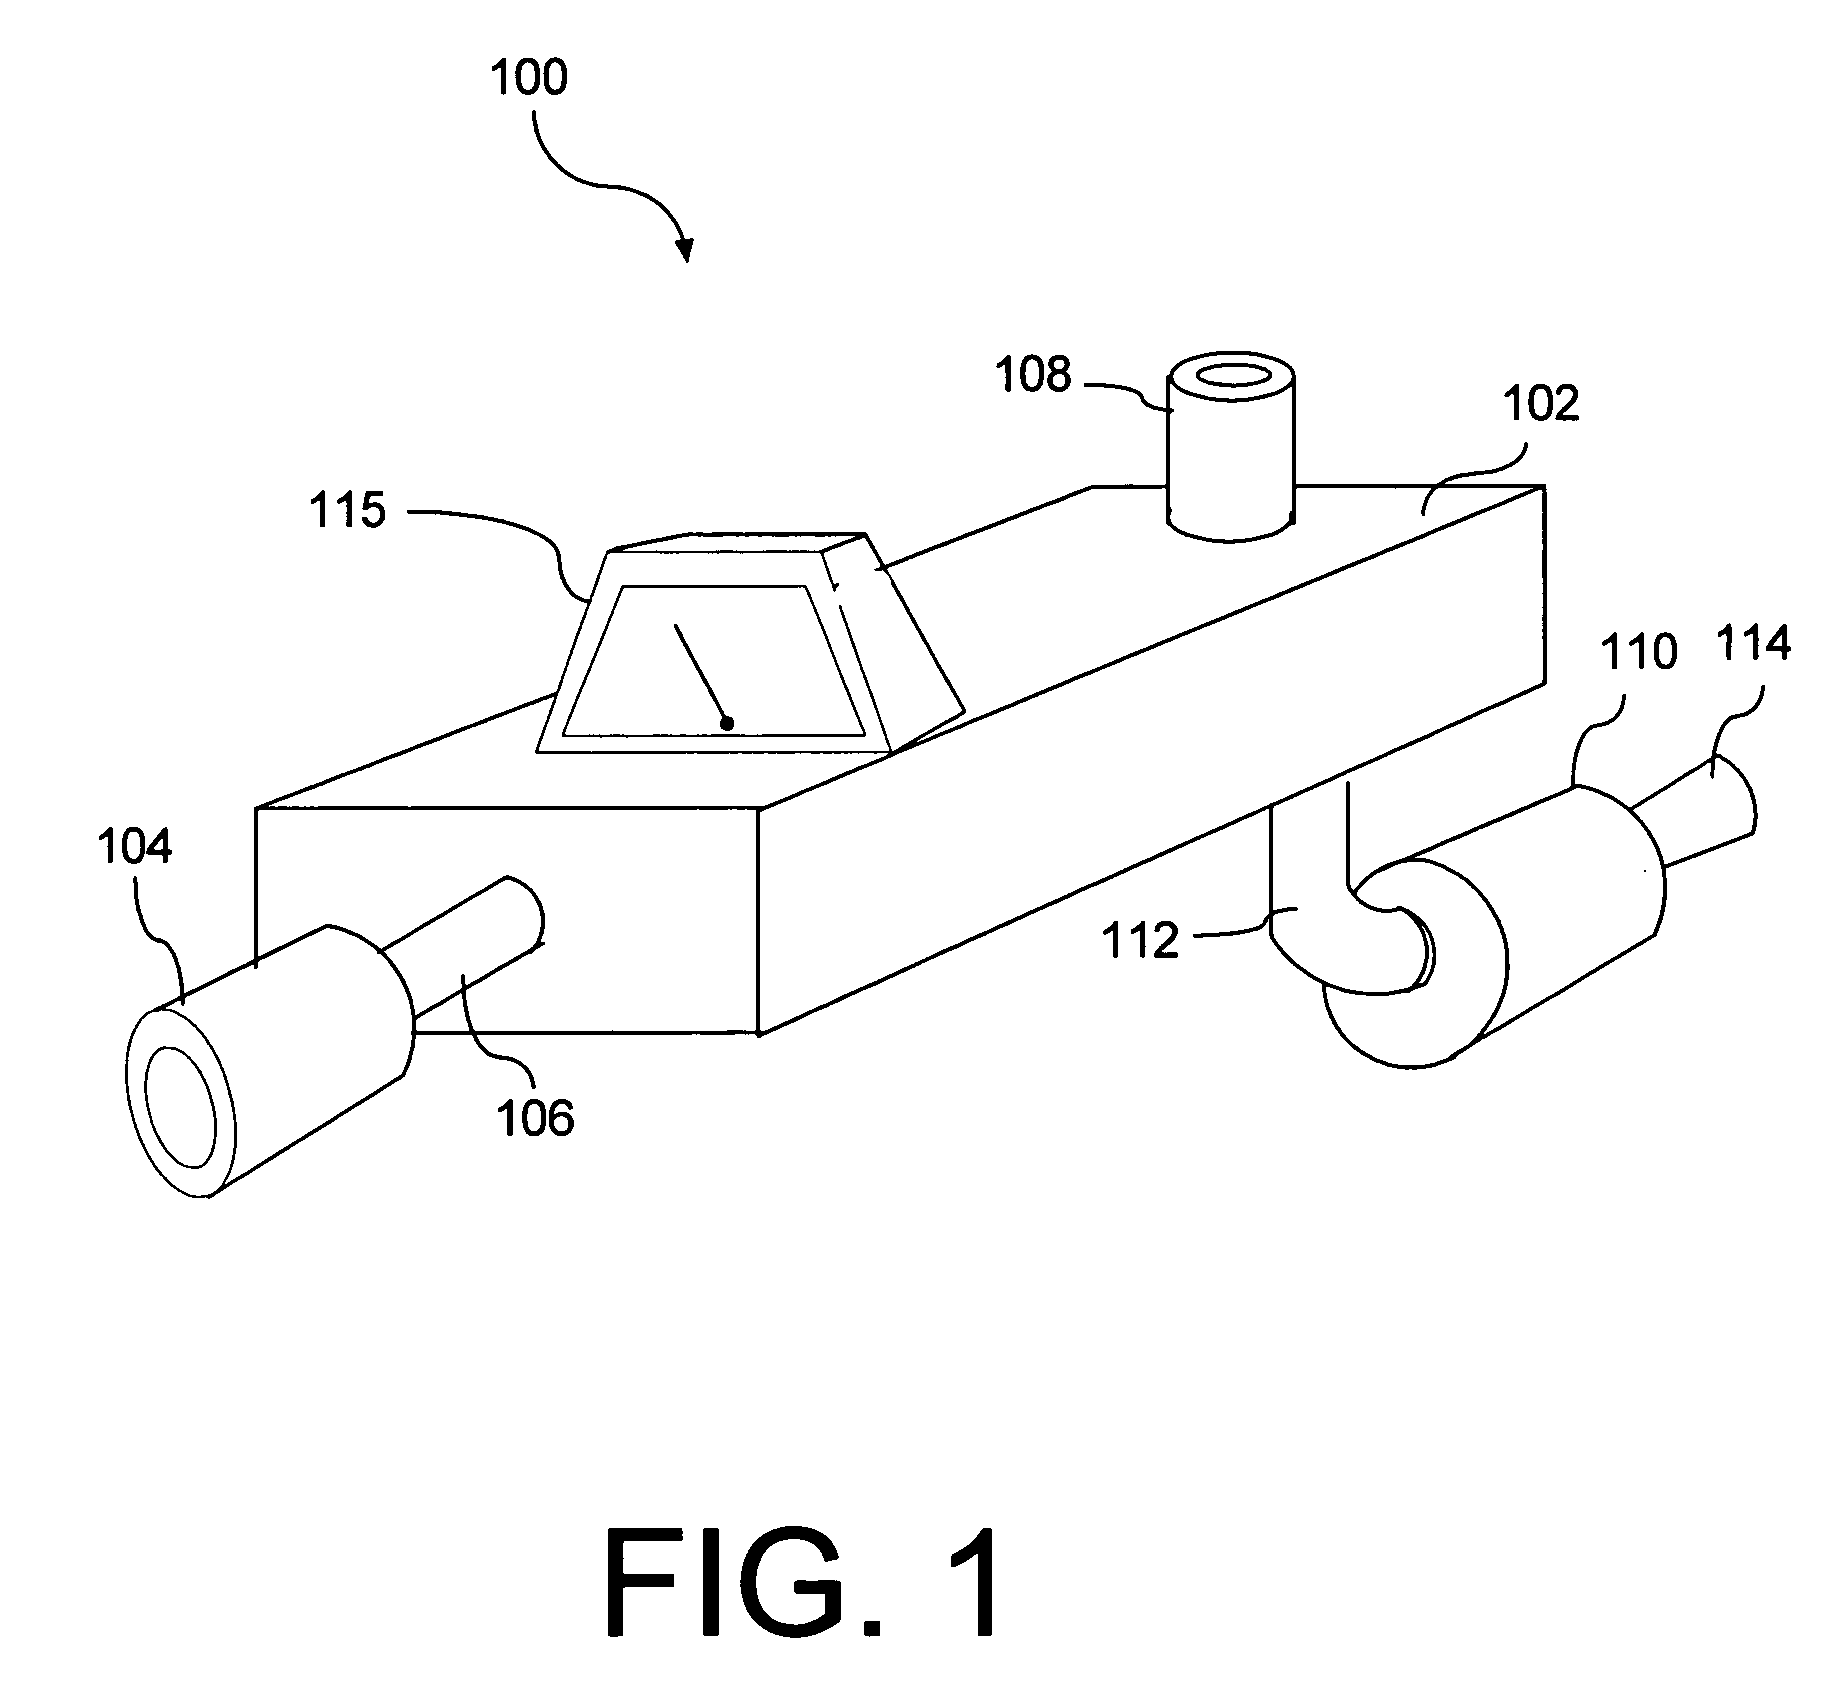 System and method for selectively collecting exhaled air